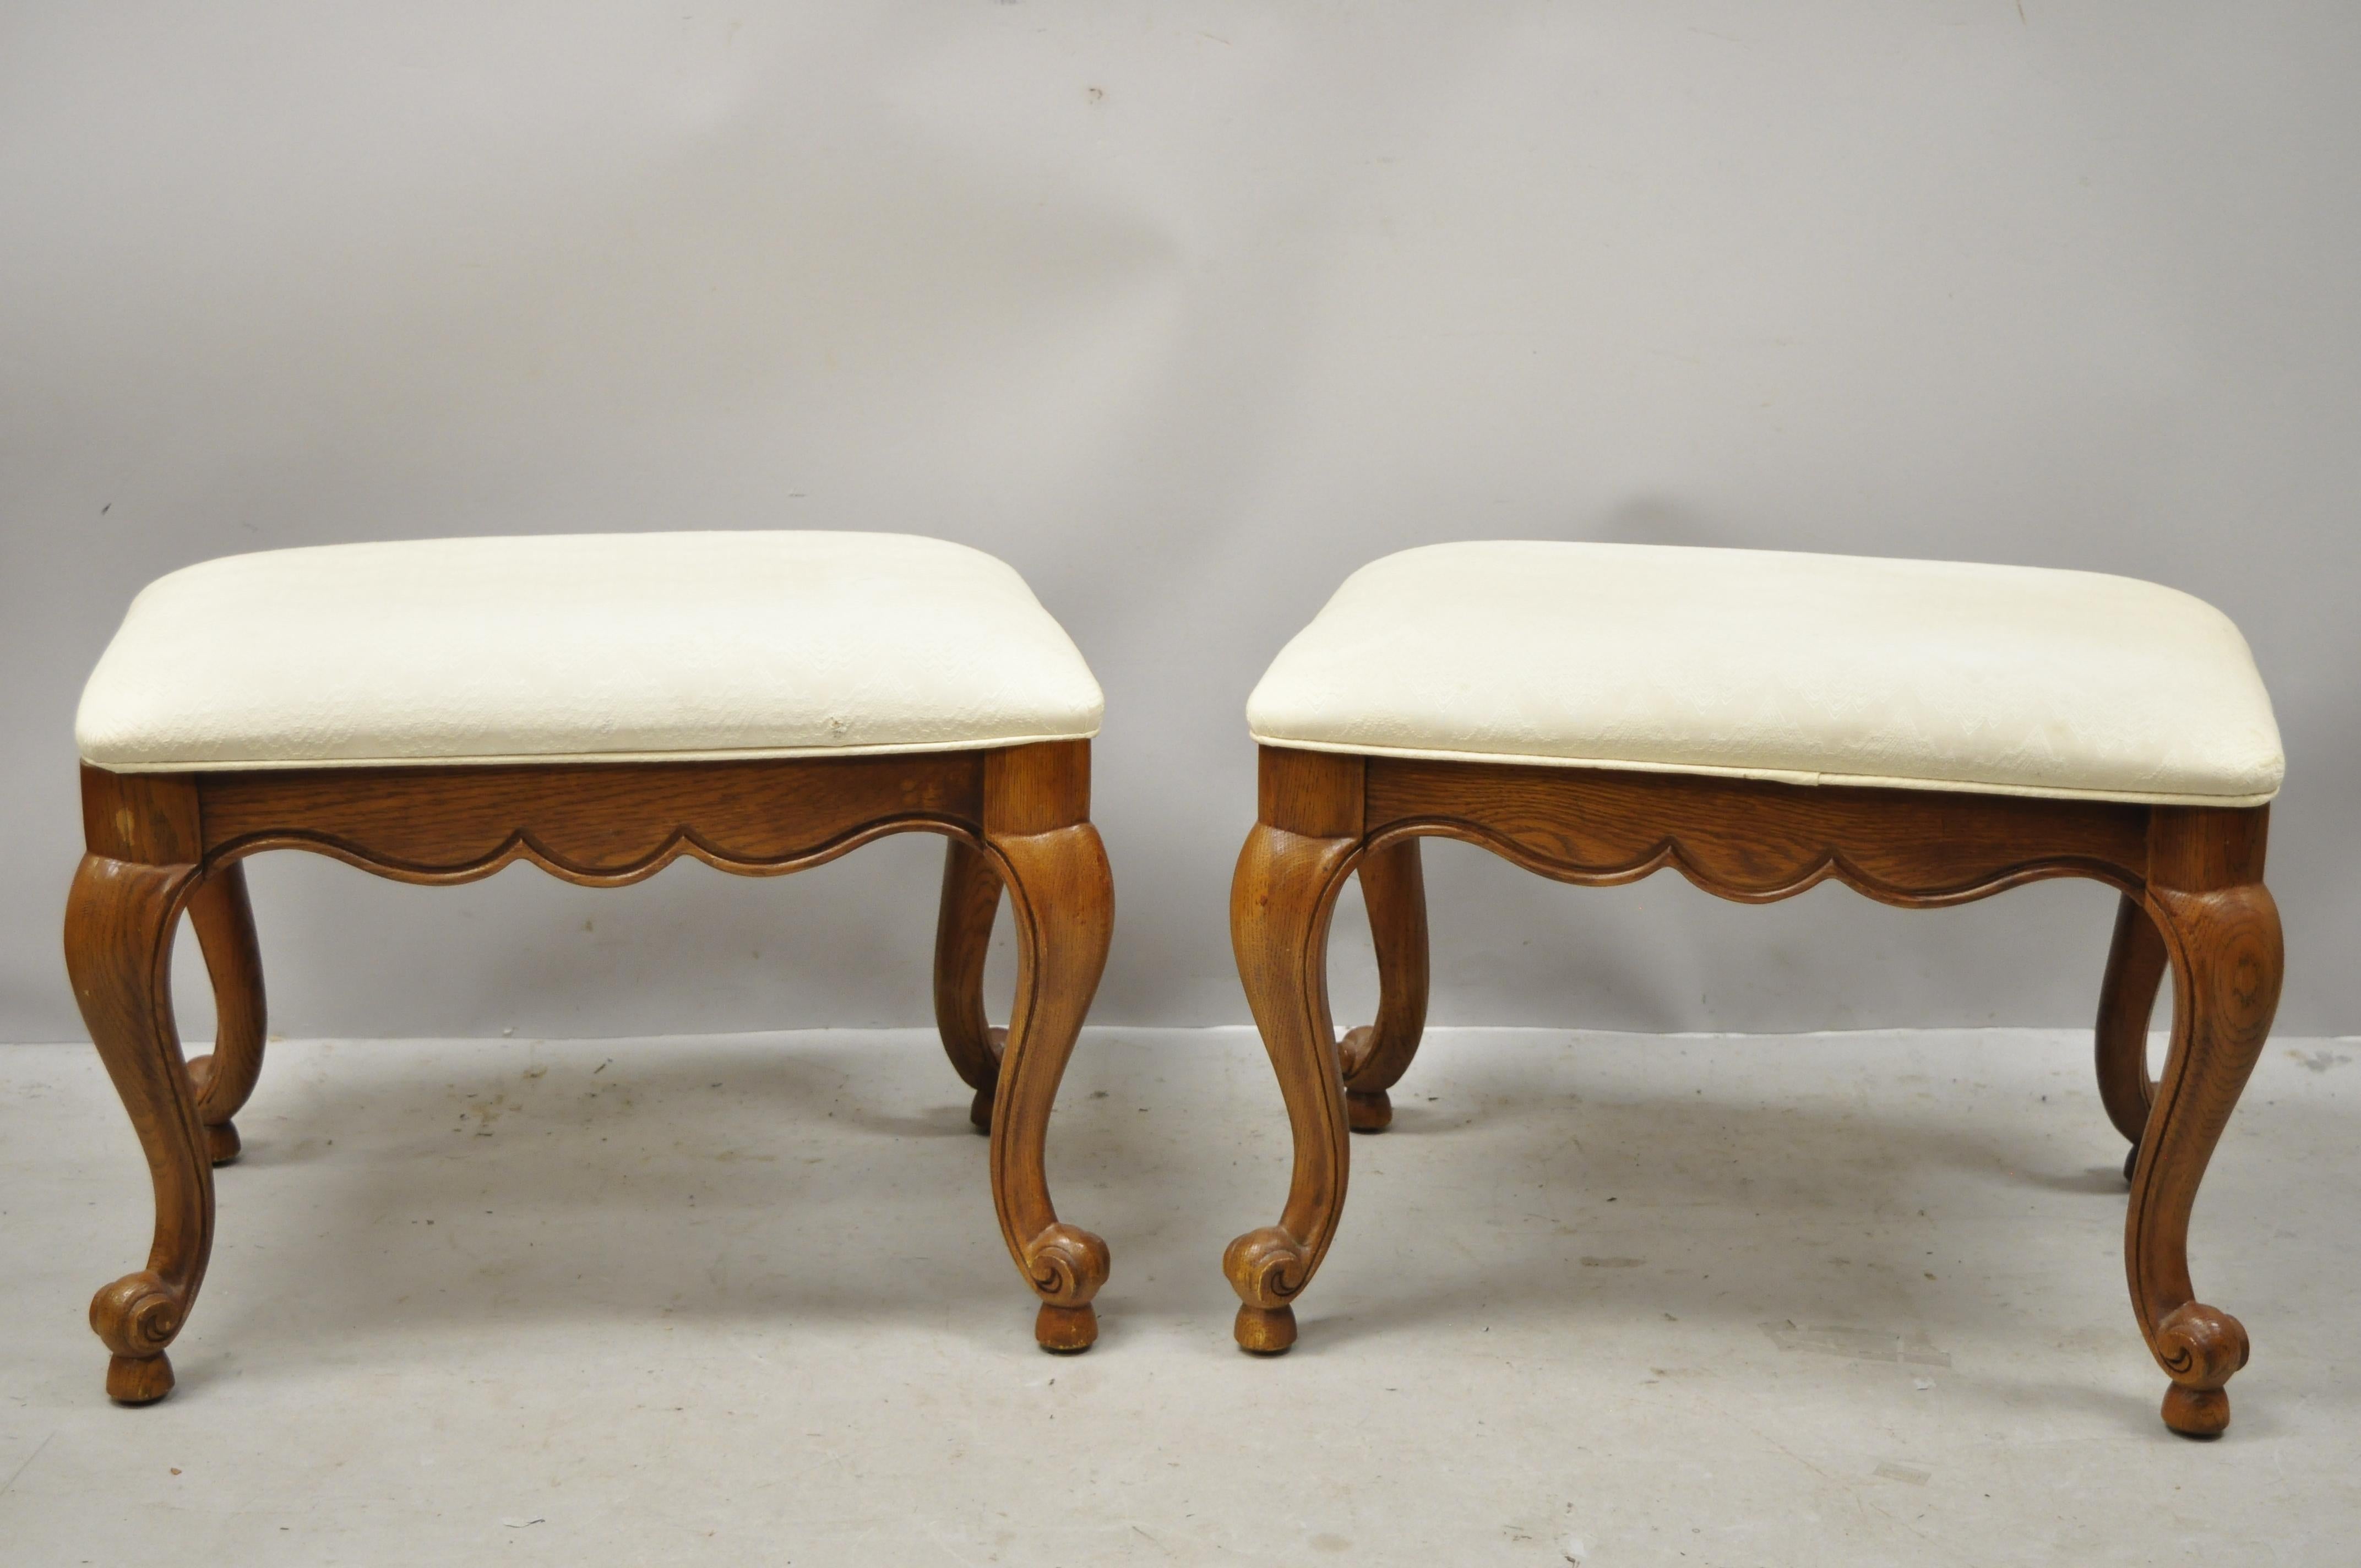 Vintage Drexel French style Provincial oakwood cabriole leg stool bench - a pair. Unmarked but believed to be by Drexel Furniture Co. Item features solid wood construction, beautiful wood grain, nicely carved details, shapely cabriole legs, quality